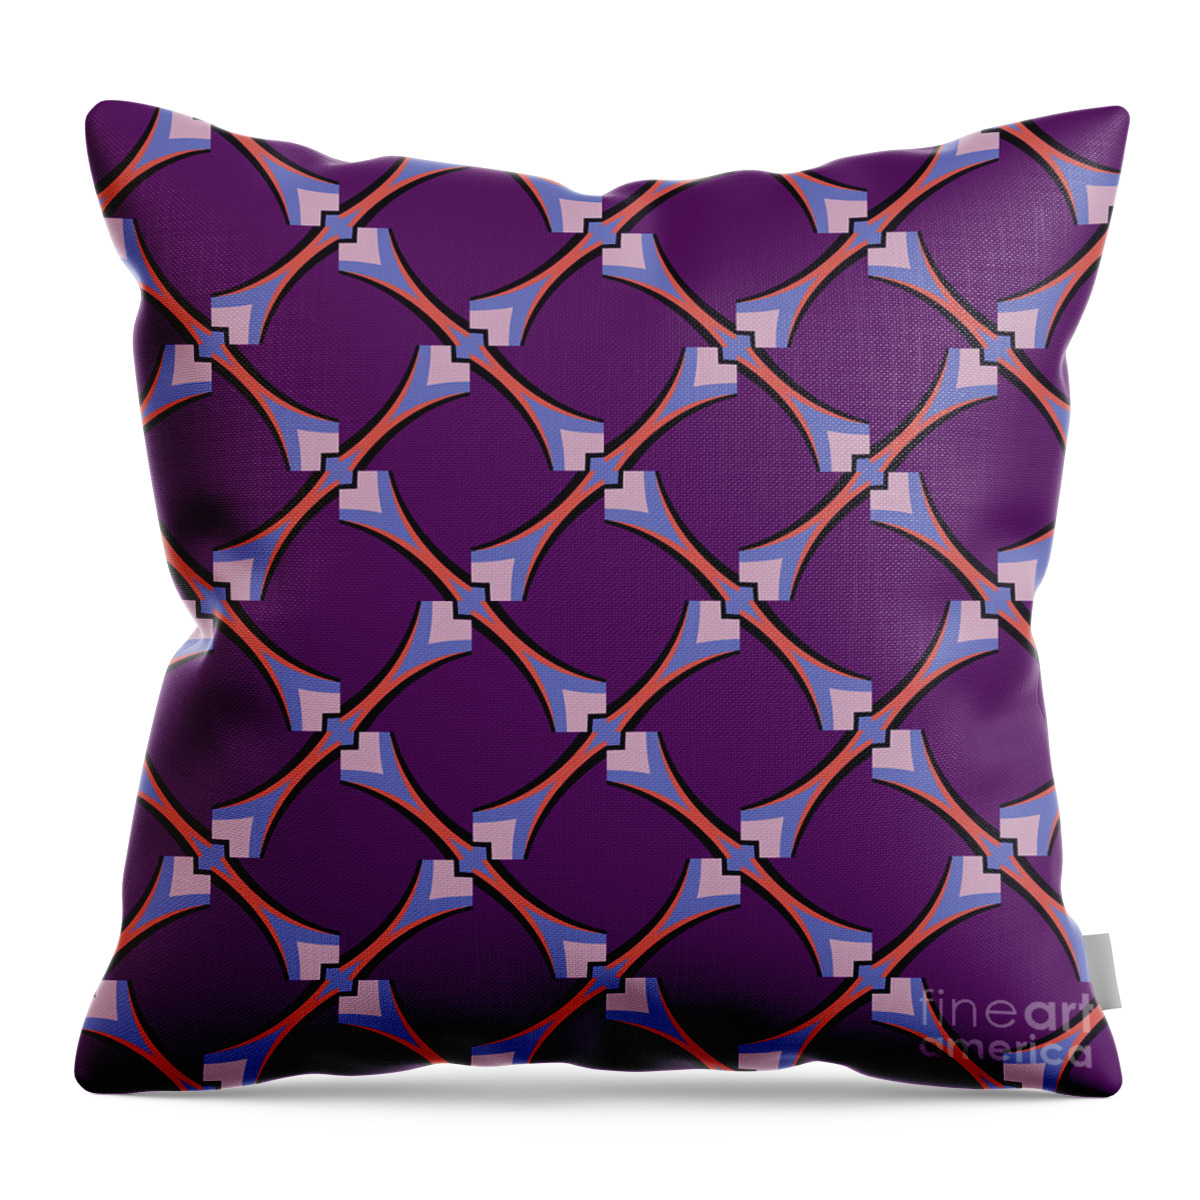 Repeated Pattern Throw Pillow featuring the digital art Geometric Pattern Design 2257b by Philip Preston